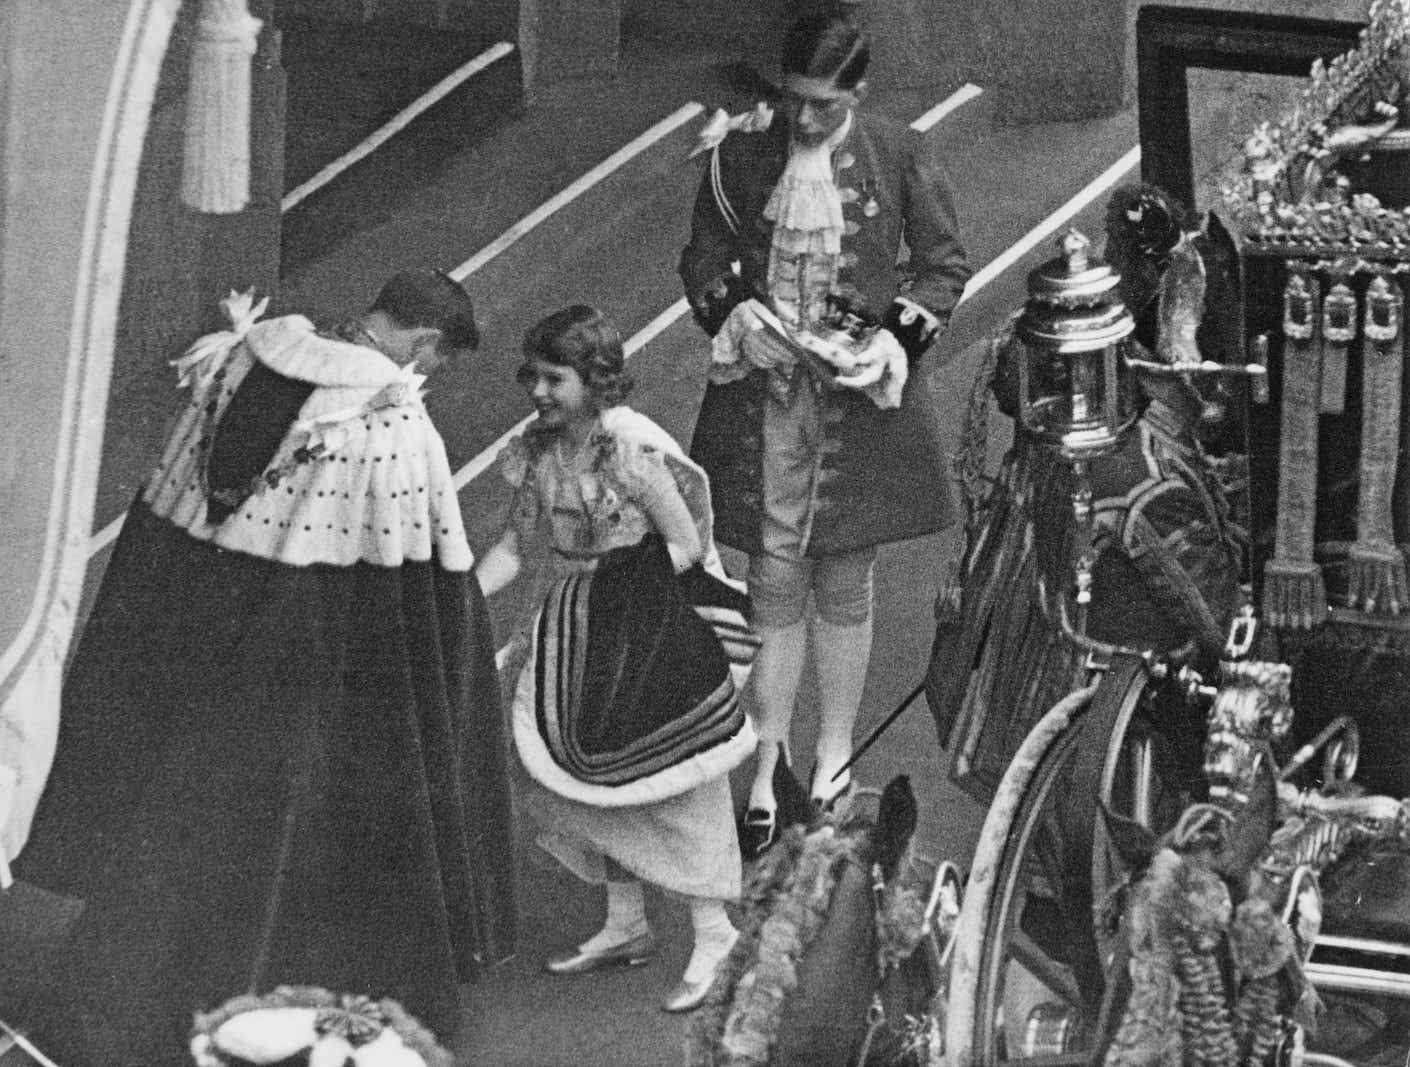 The future Queen Elizabeth II arrives at Westminster Abbey for the coronation of her father, King George VI, 12th May 1937.